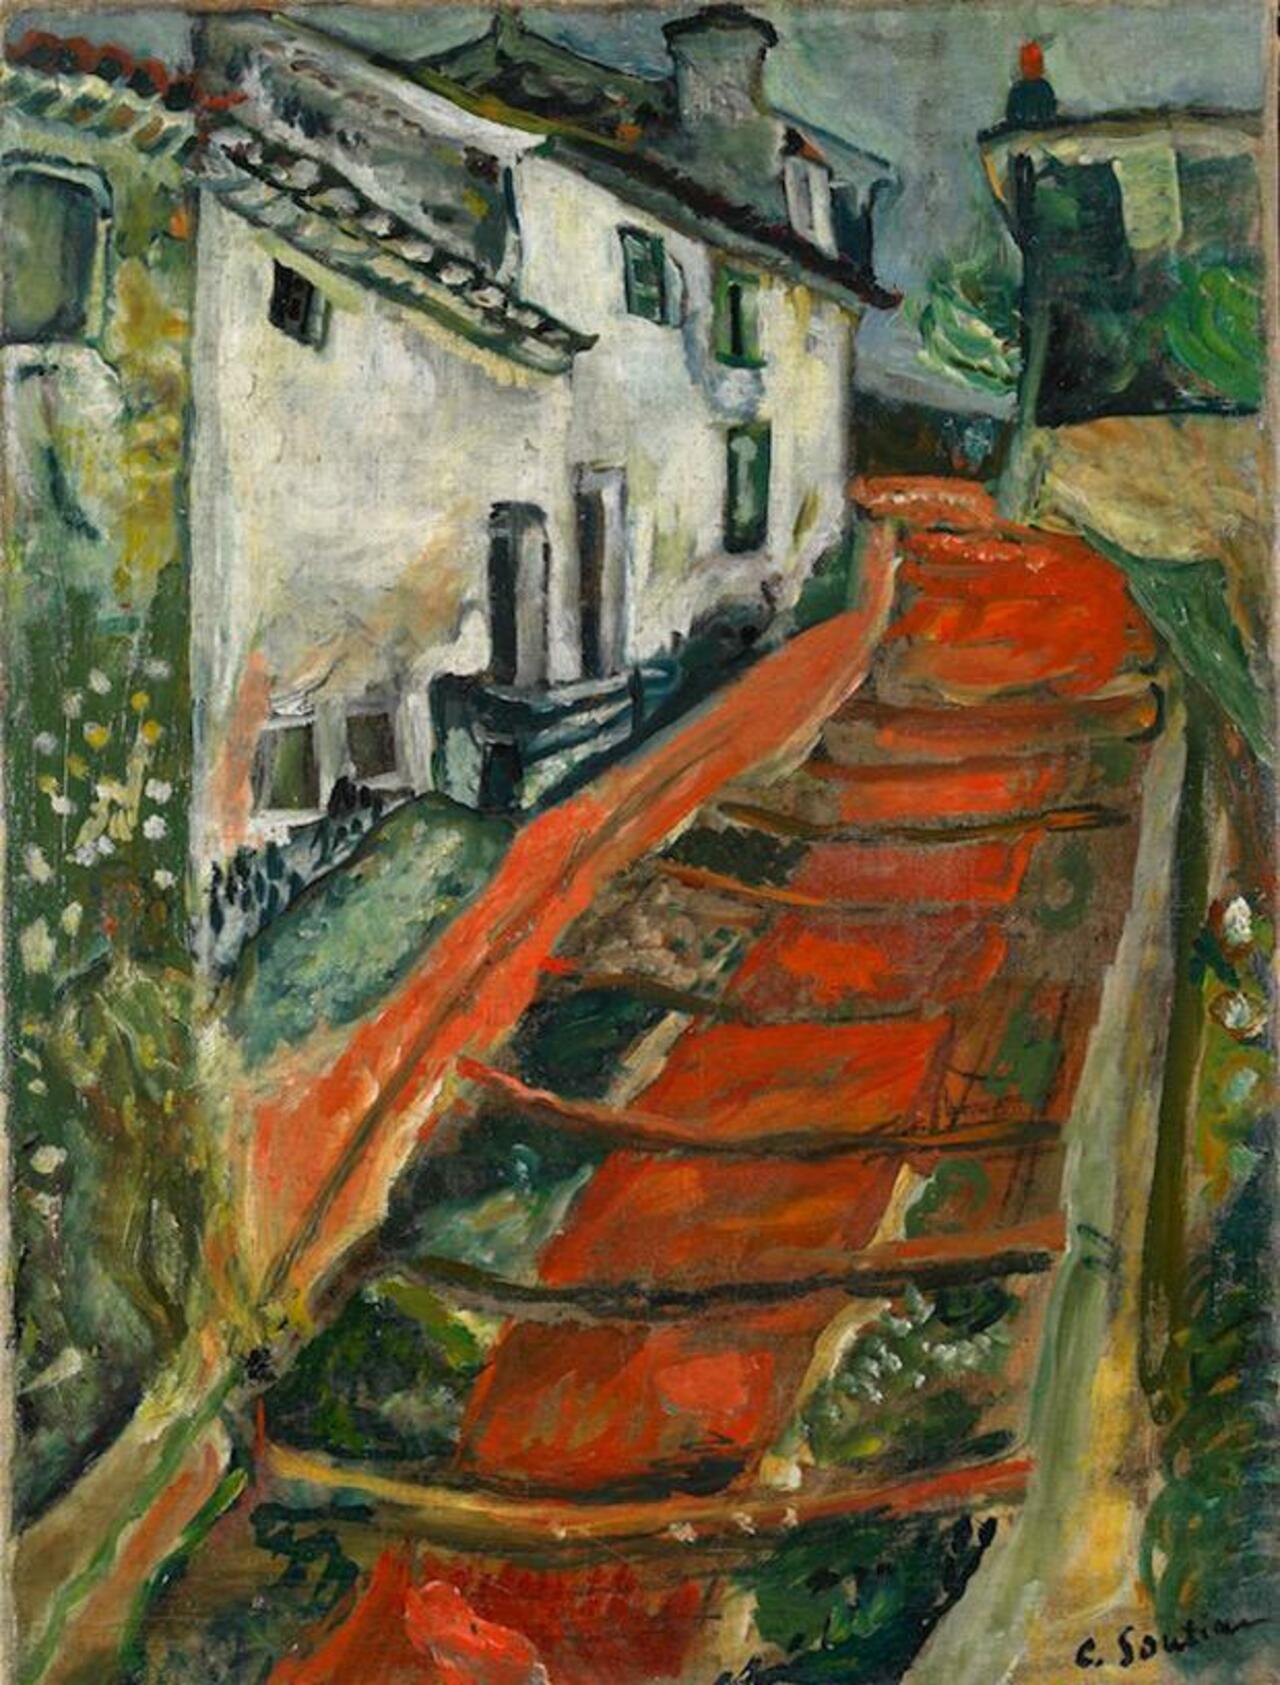 Chaim Soutine: La Scala rossa a Cagnes
#art
#painting 
an embroidery of color
@maiafushi @swedhopkins @GeertHermsen http://t.co/YjUXBNtOZ1